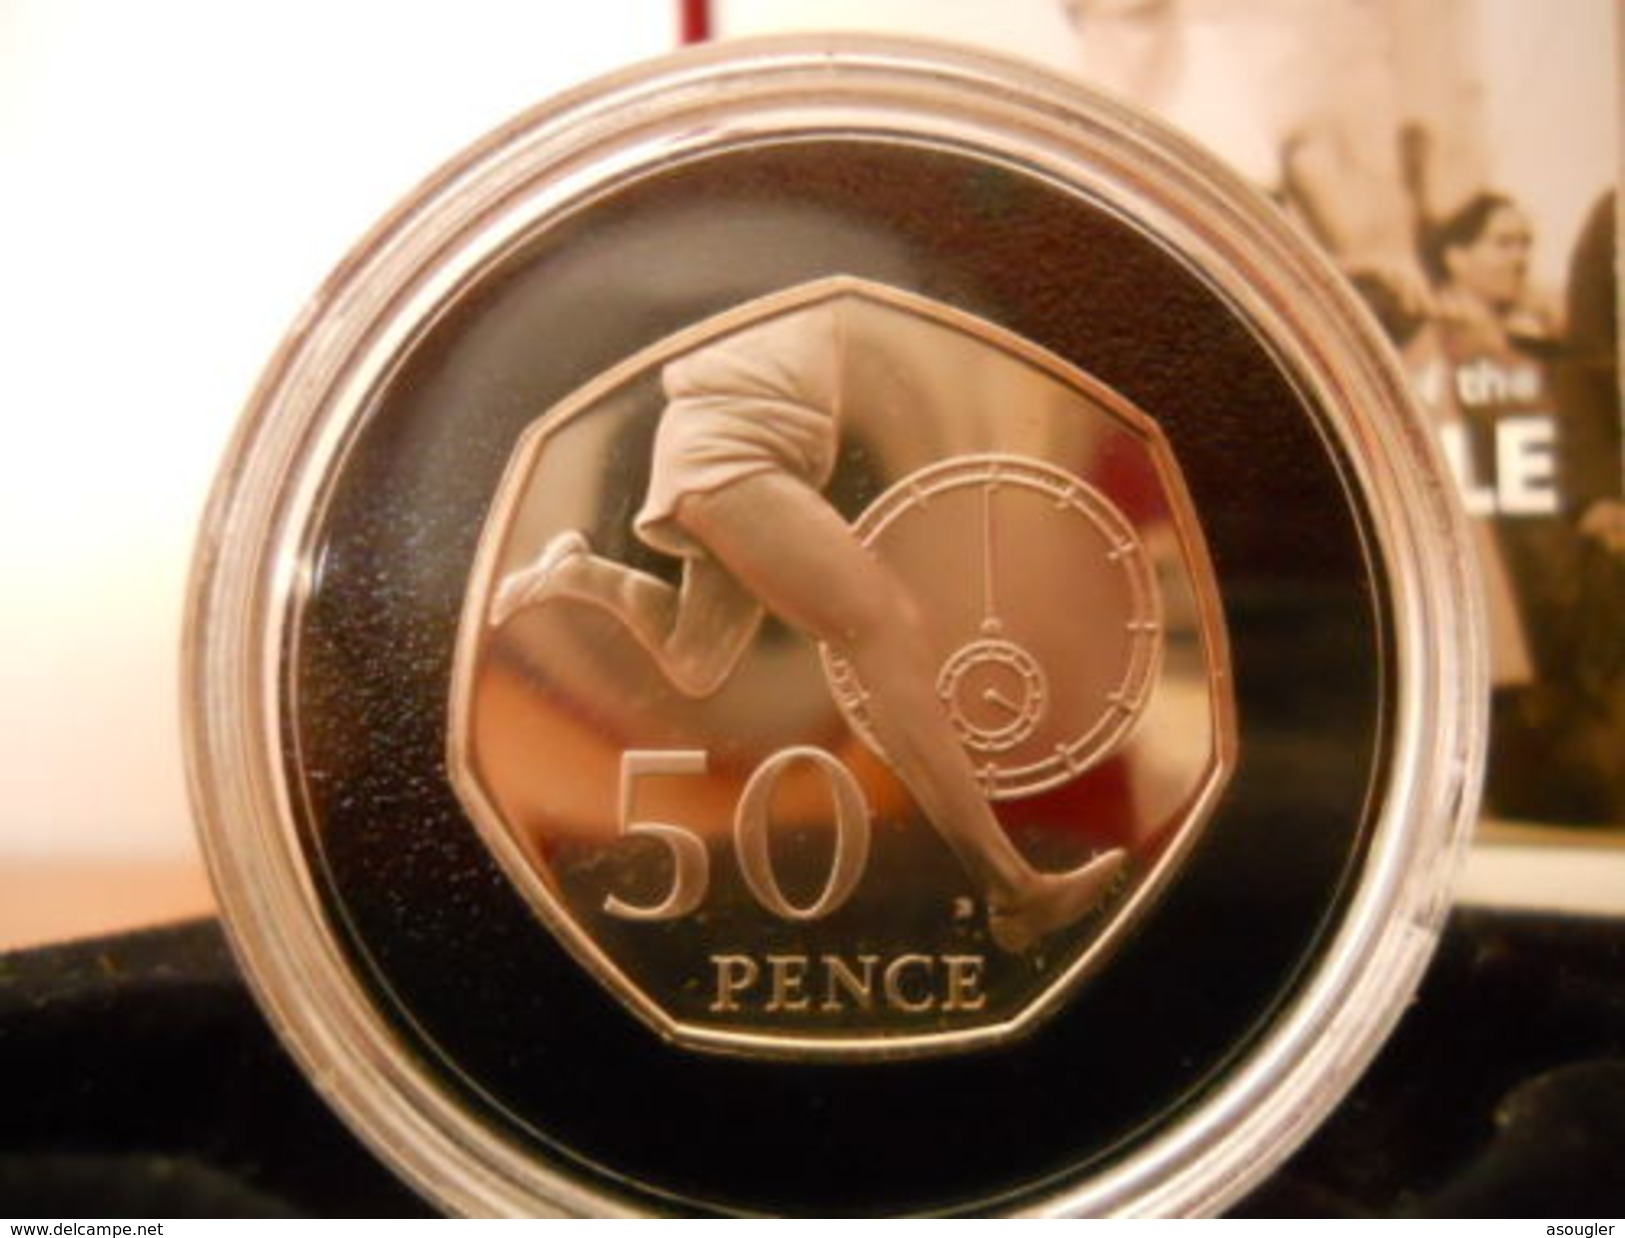 UK GREAT BRITAIN 50 PENCE 2004 SILVER PROOF "50 ANNIV. FOUR MINUTE MILE" - Maundy Sets & Commemorative